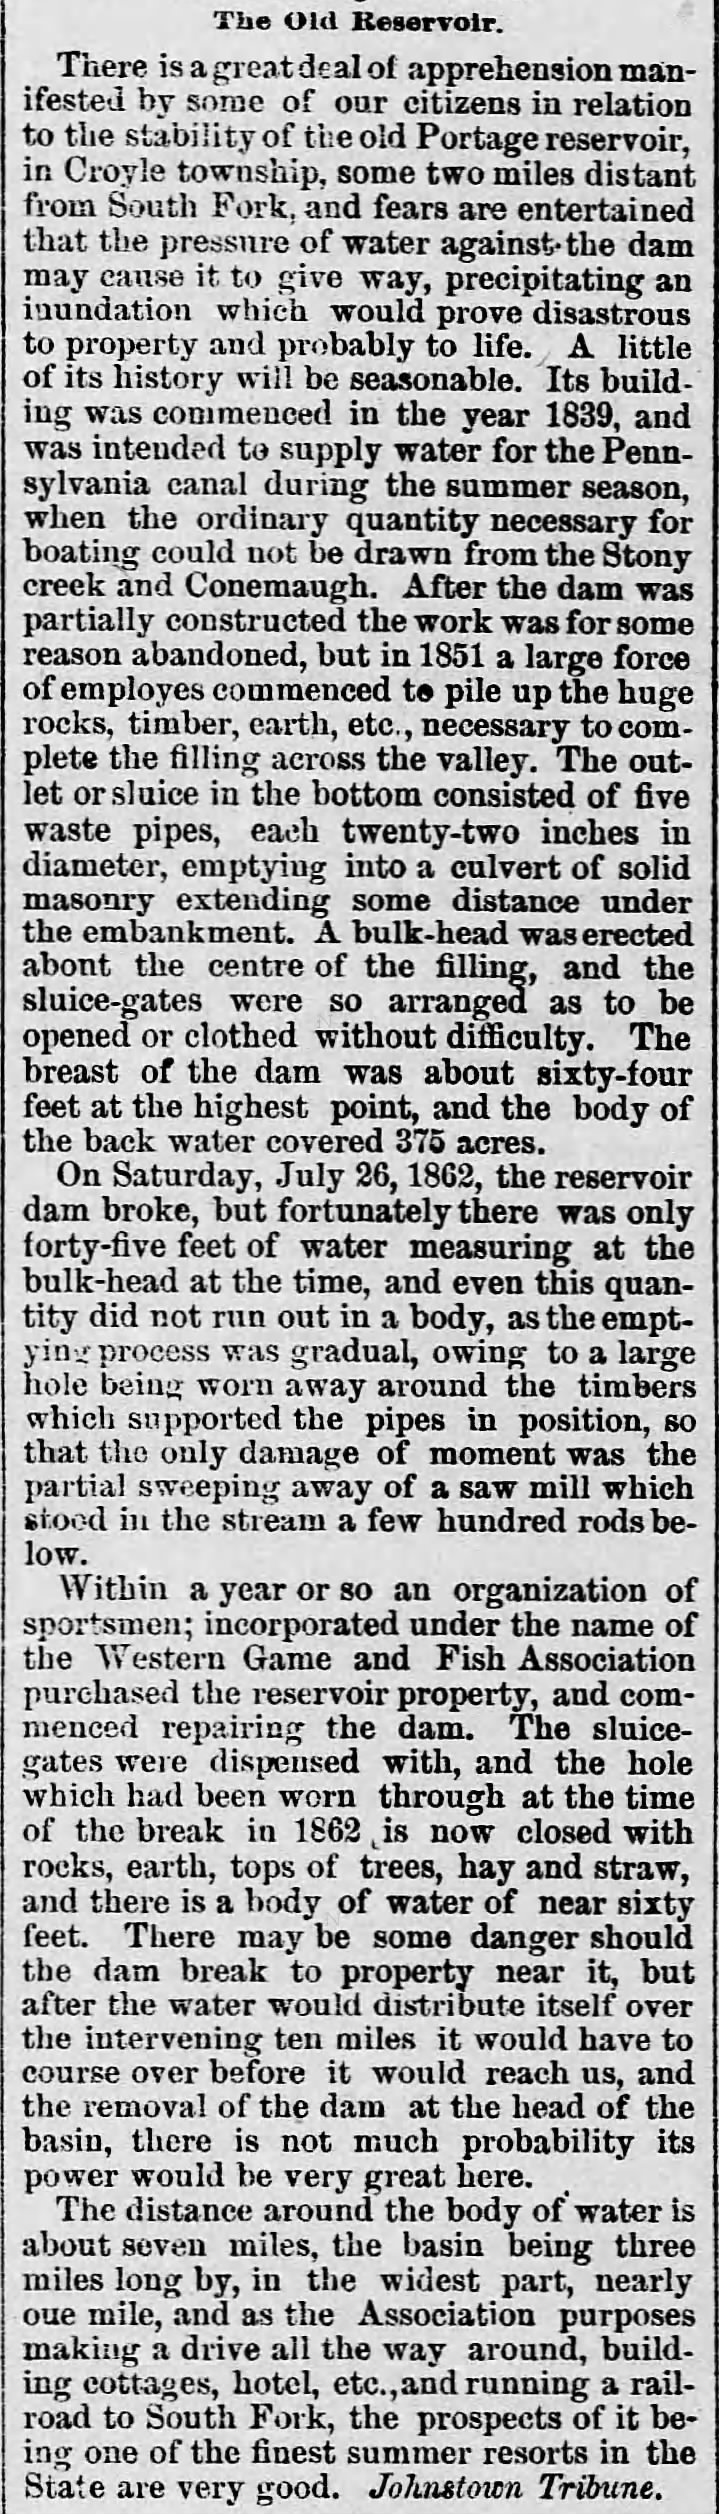 History, description, and misgivings in relation to South Fork Dam, 8 yrs prior to Johnstown Flood